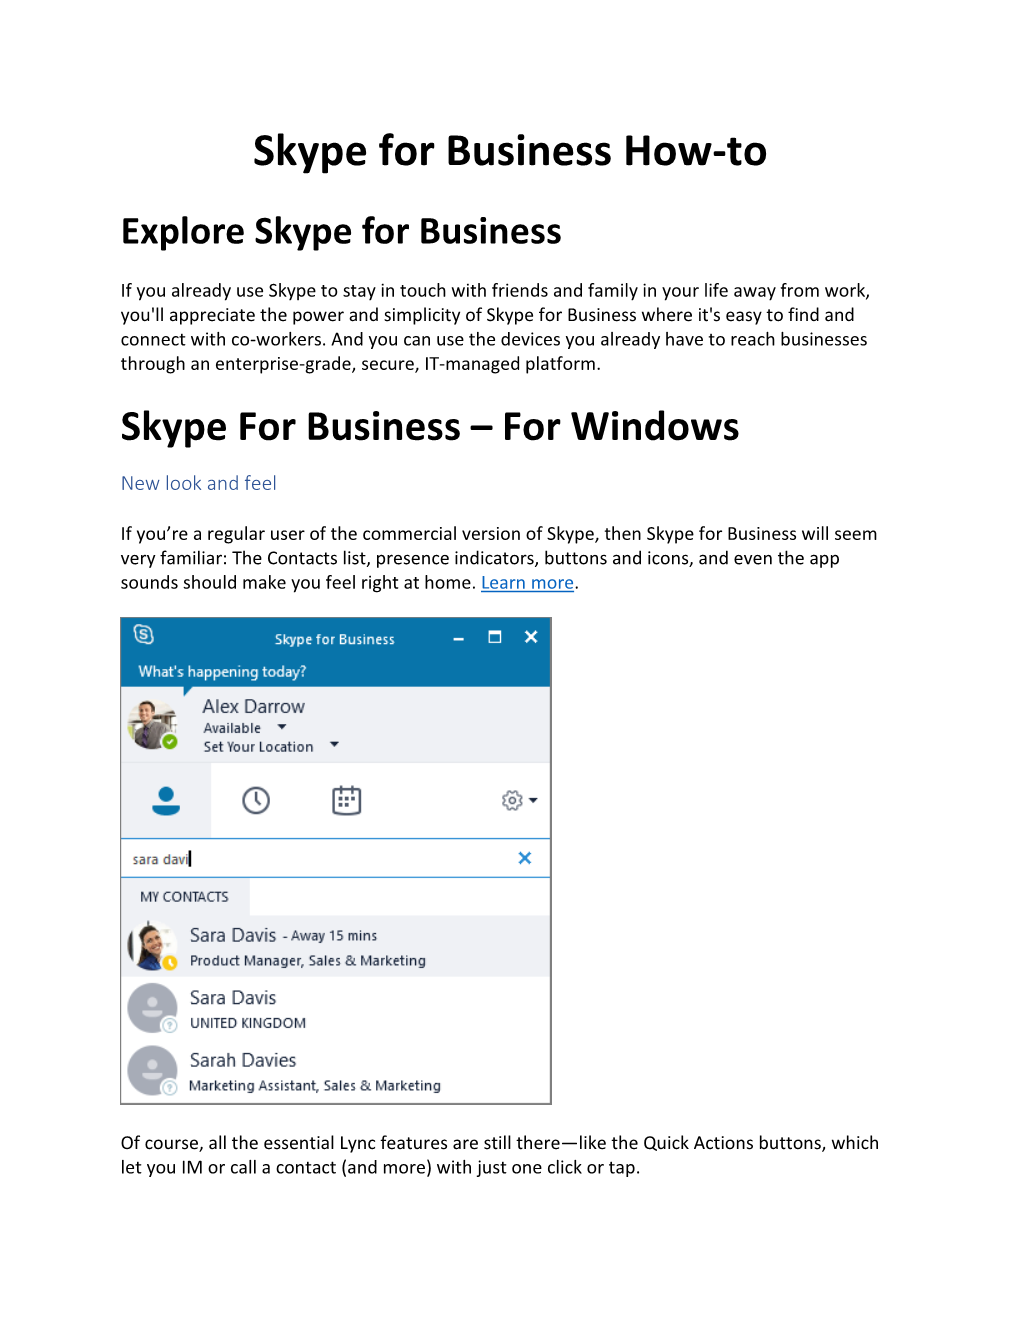 Skype for Business How-To Explore Skype for Business